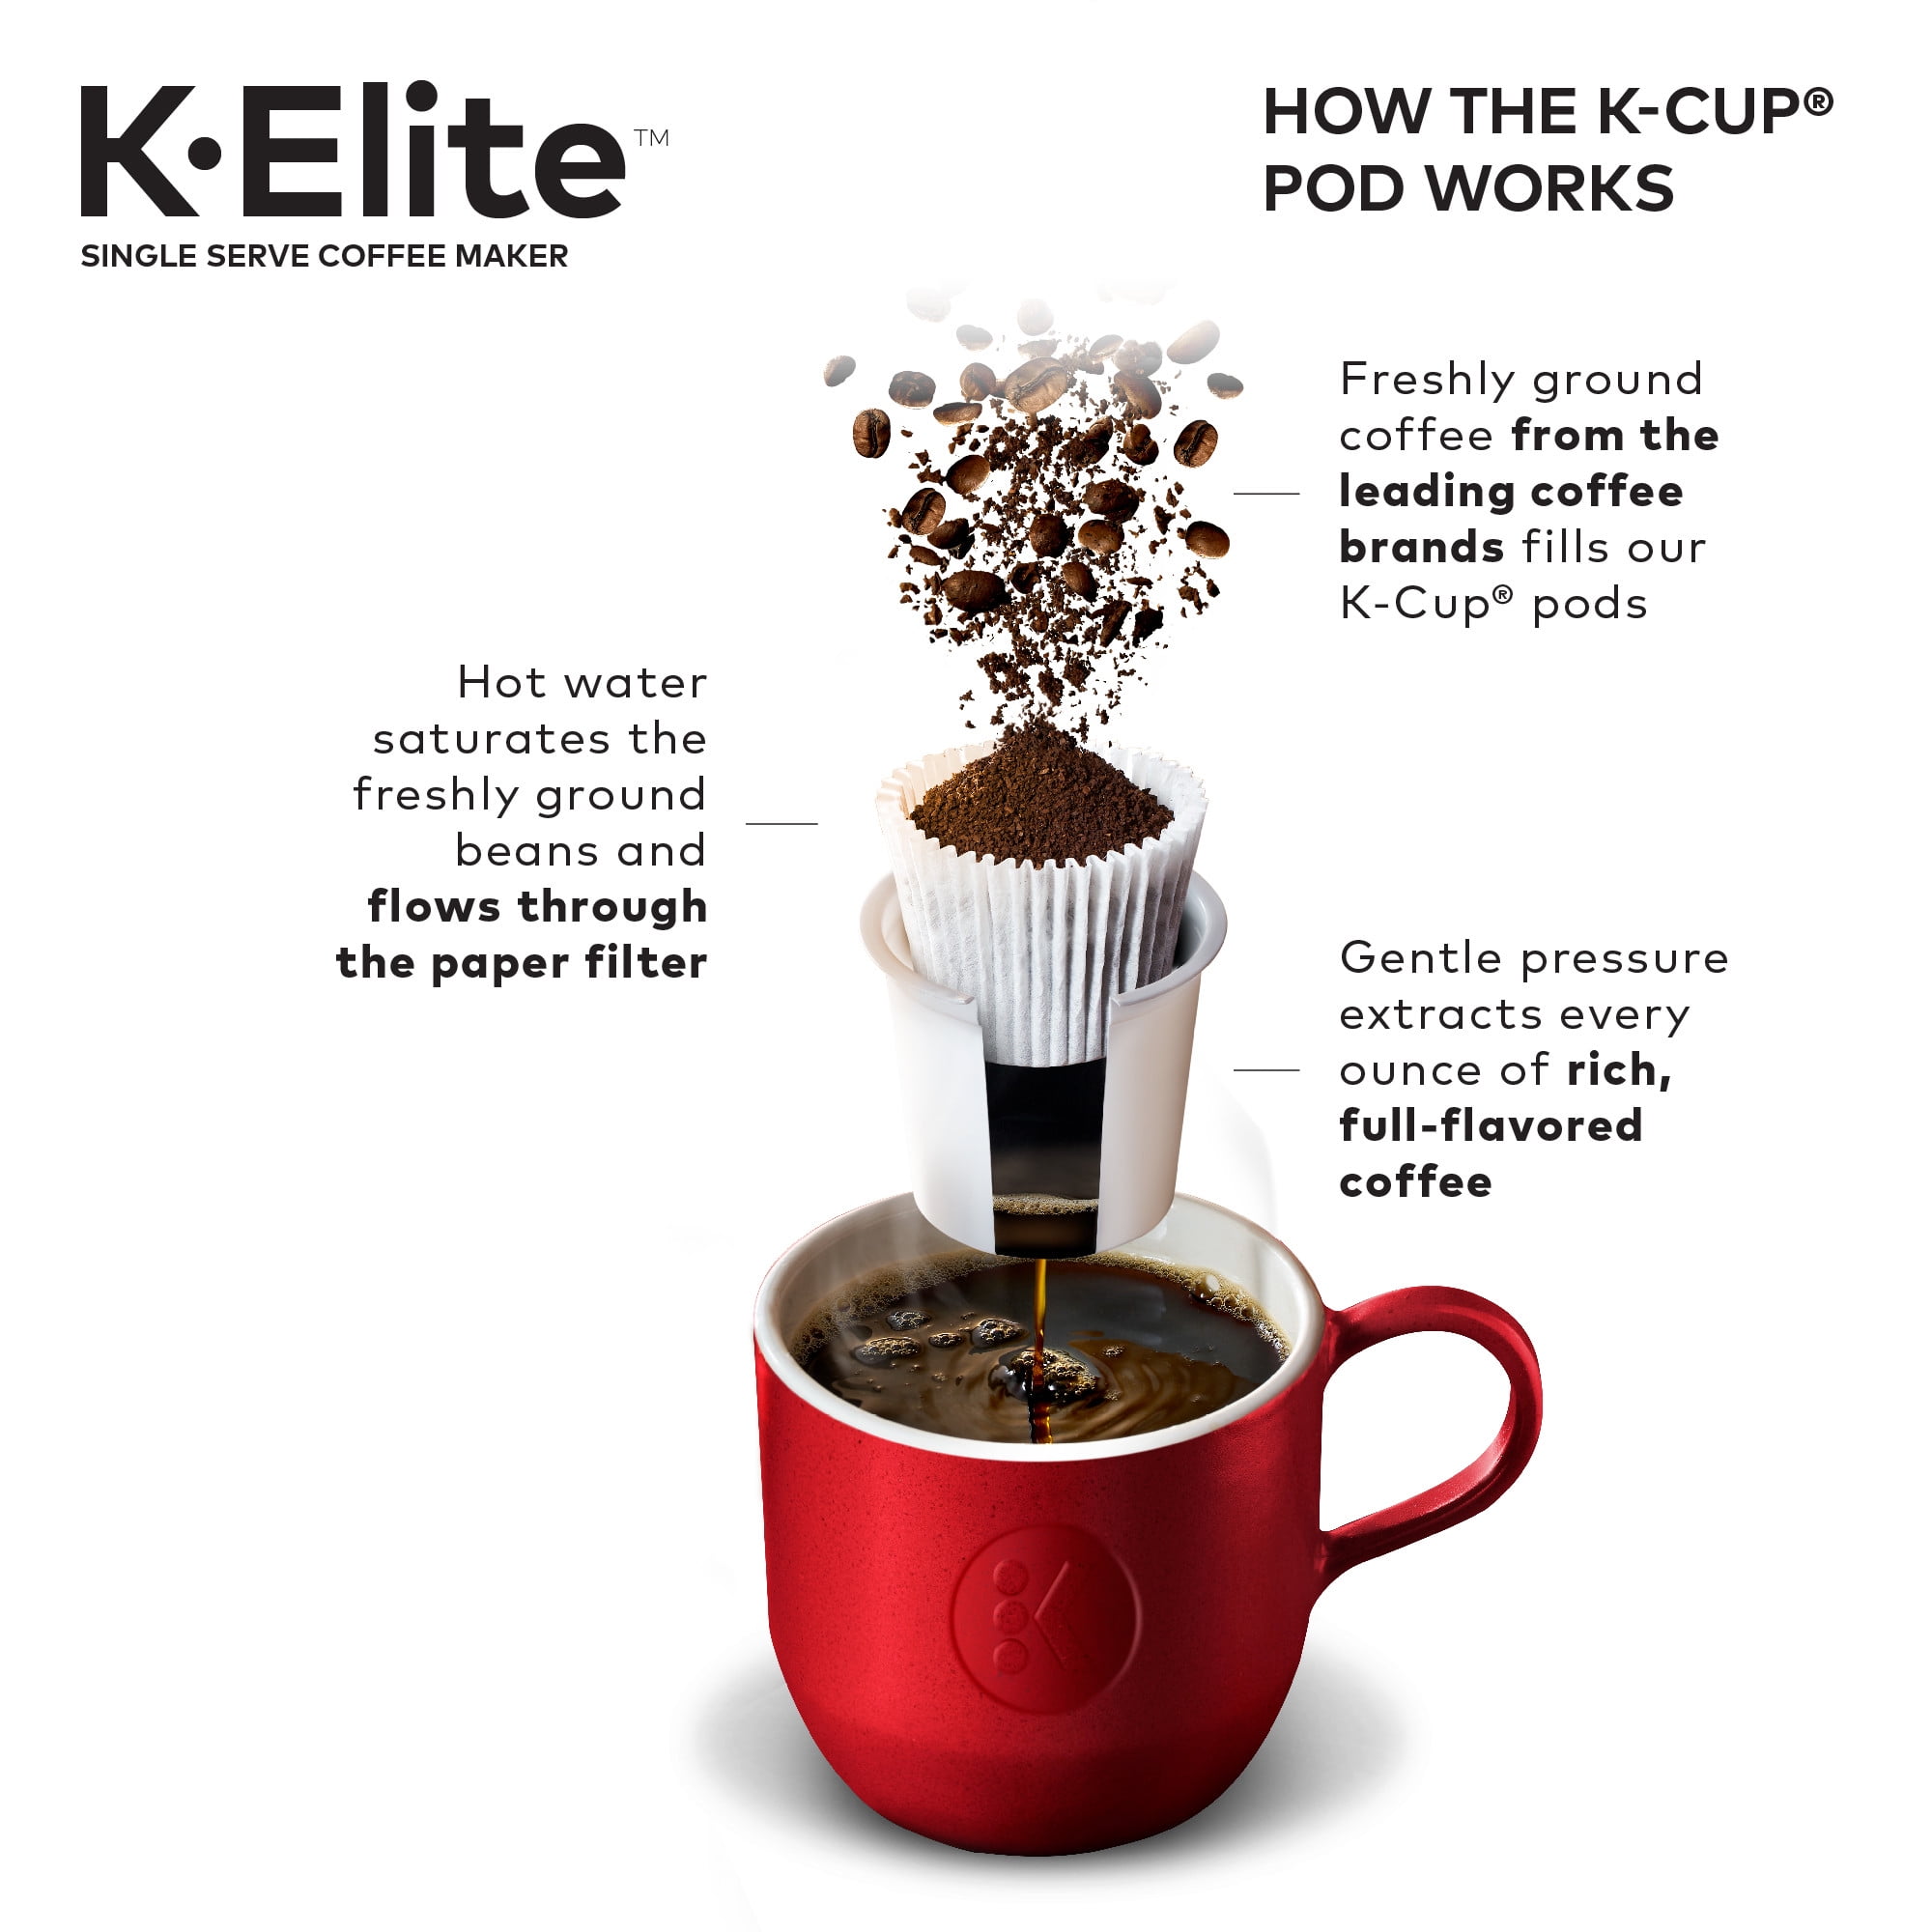 SEAL限定商品】 Keurig K-Elite Single Serve K-Cup Pod Coffee Maker with Extra  Filter, 12-Count Italian Roast, Cleaning Cups and Tumbler Bundle Items ＿ 並行輸入